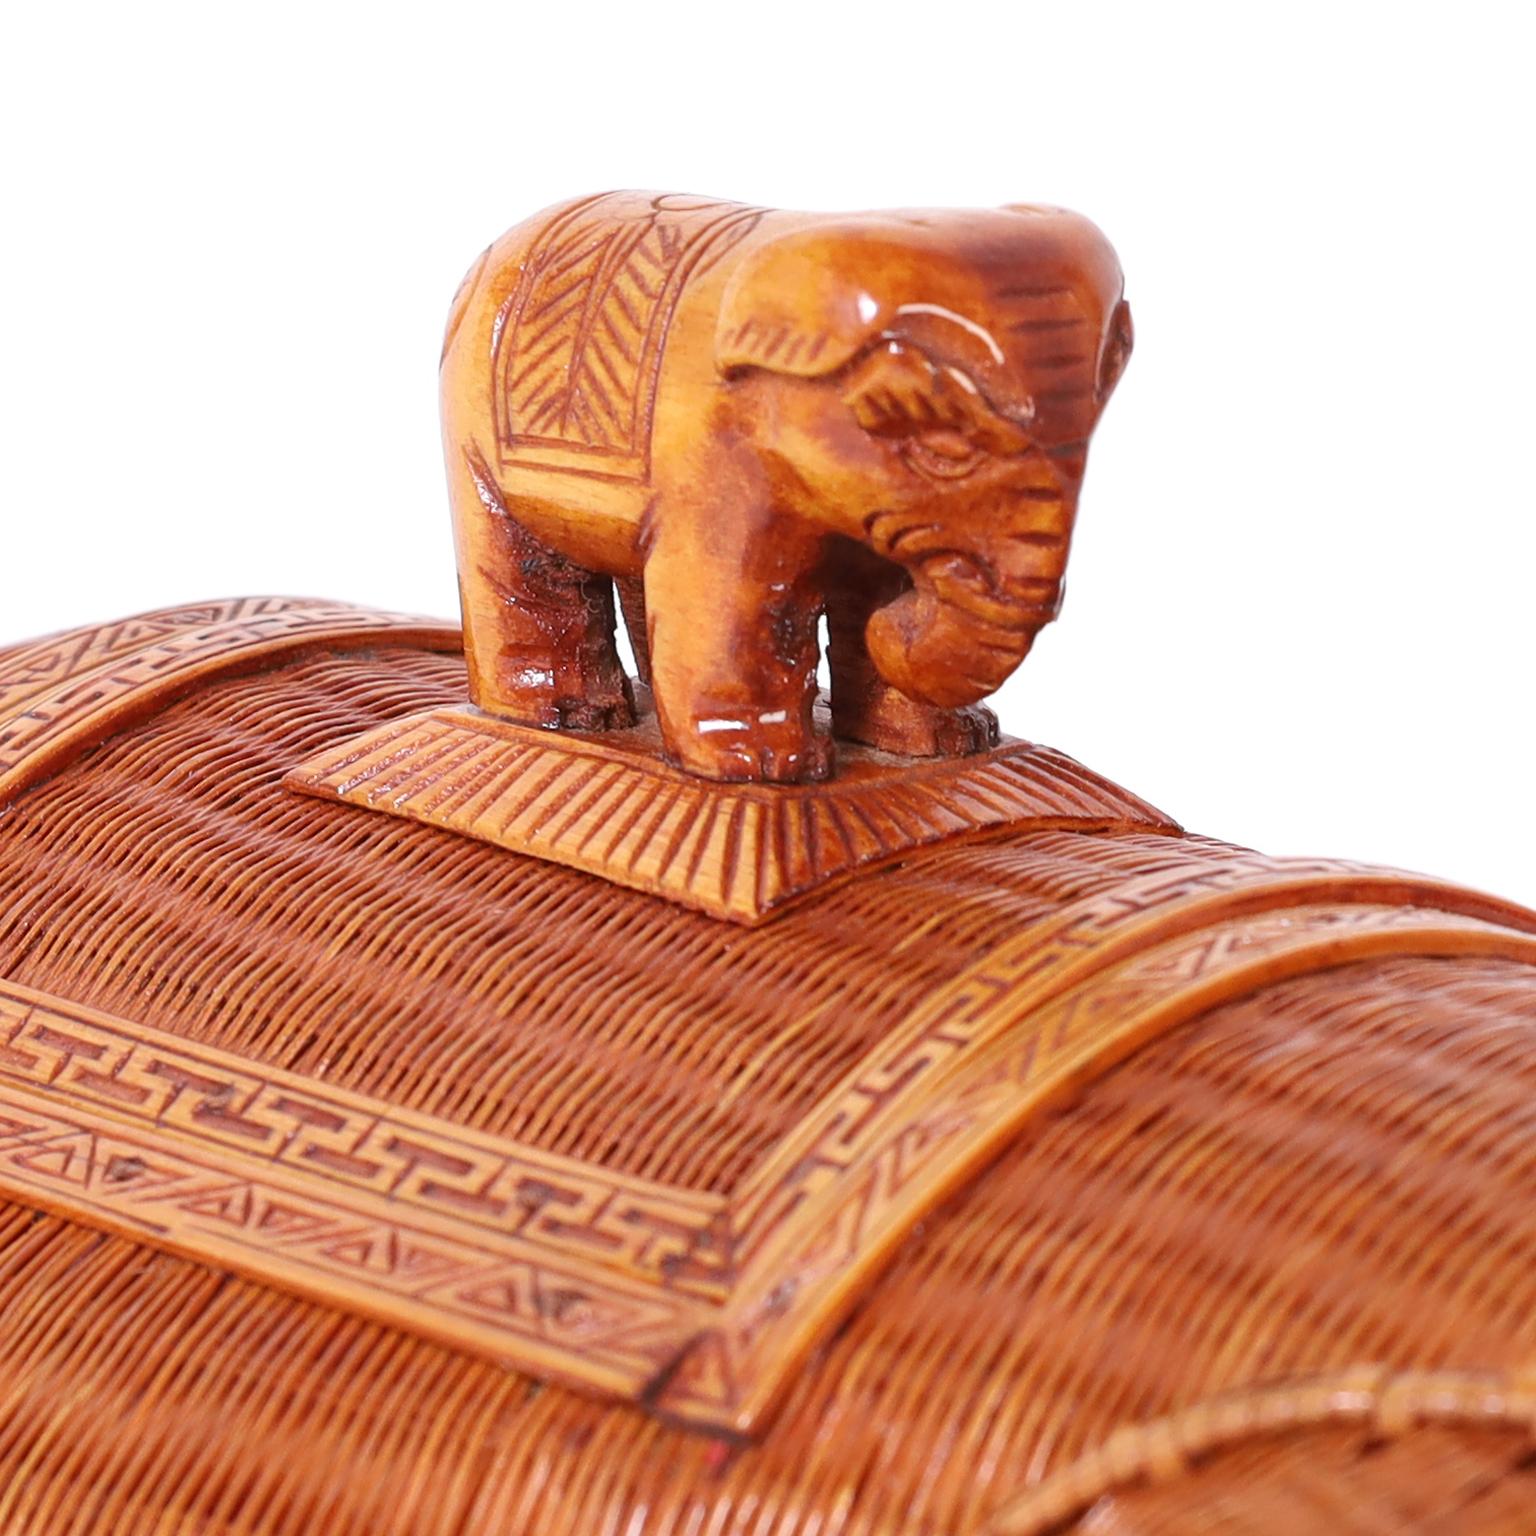 Wicker Elephant Box In Good Condition For Sale In Palm Beach, FL